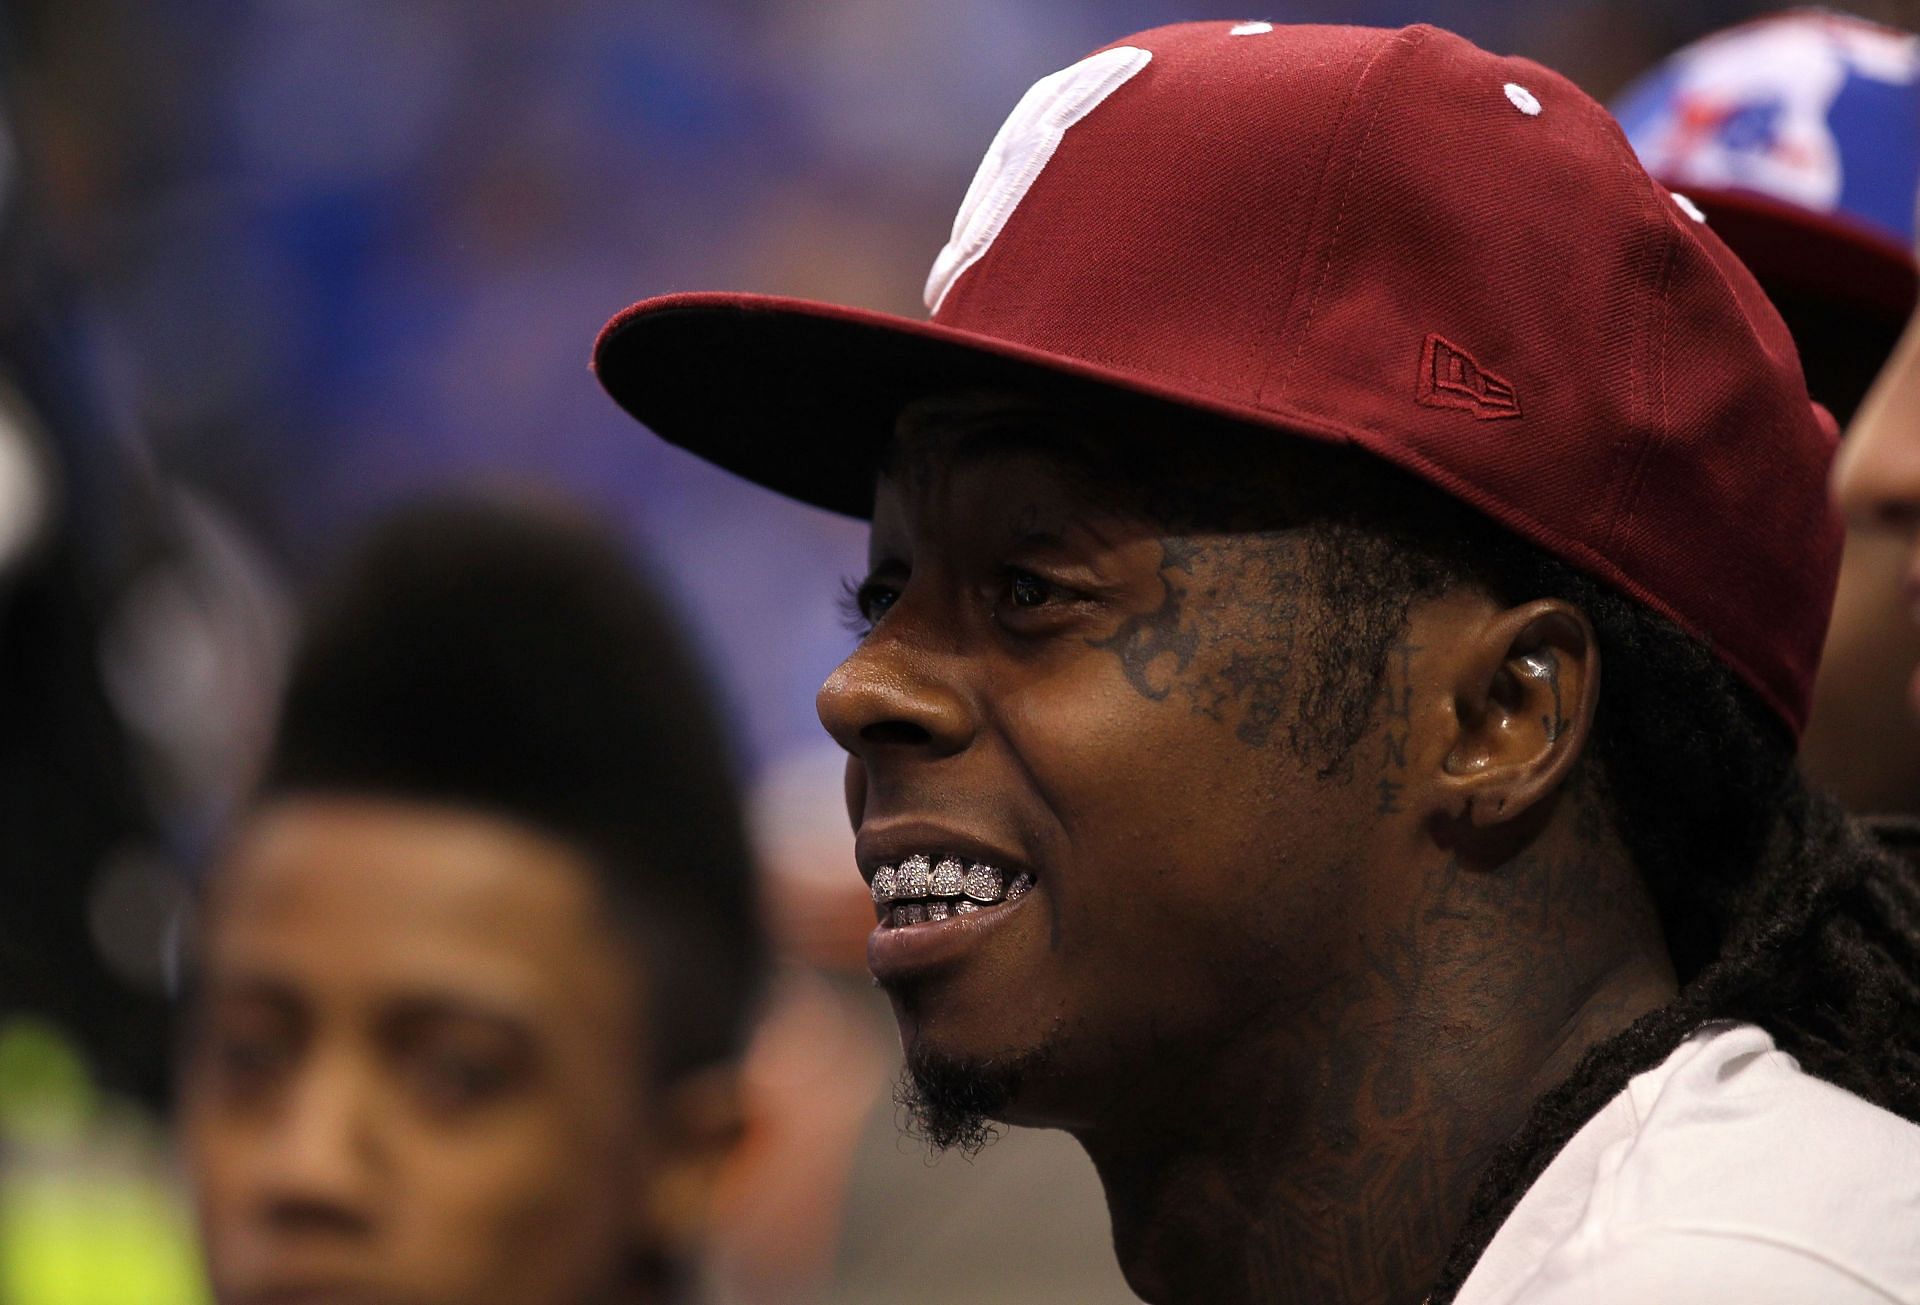 The popular rapper attended many NBA games (Image via Getty Images)